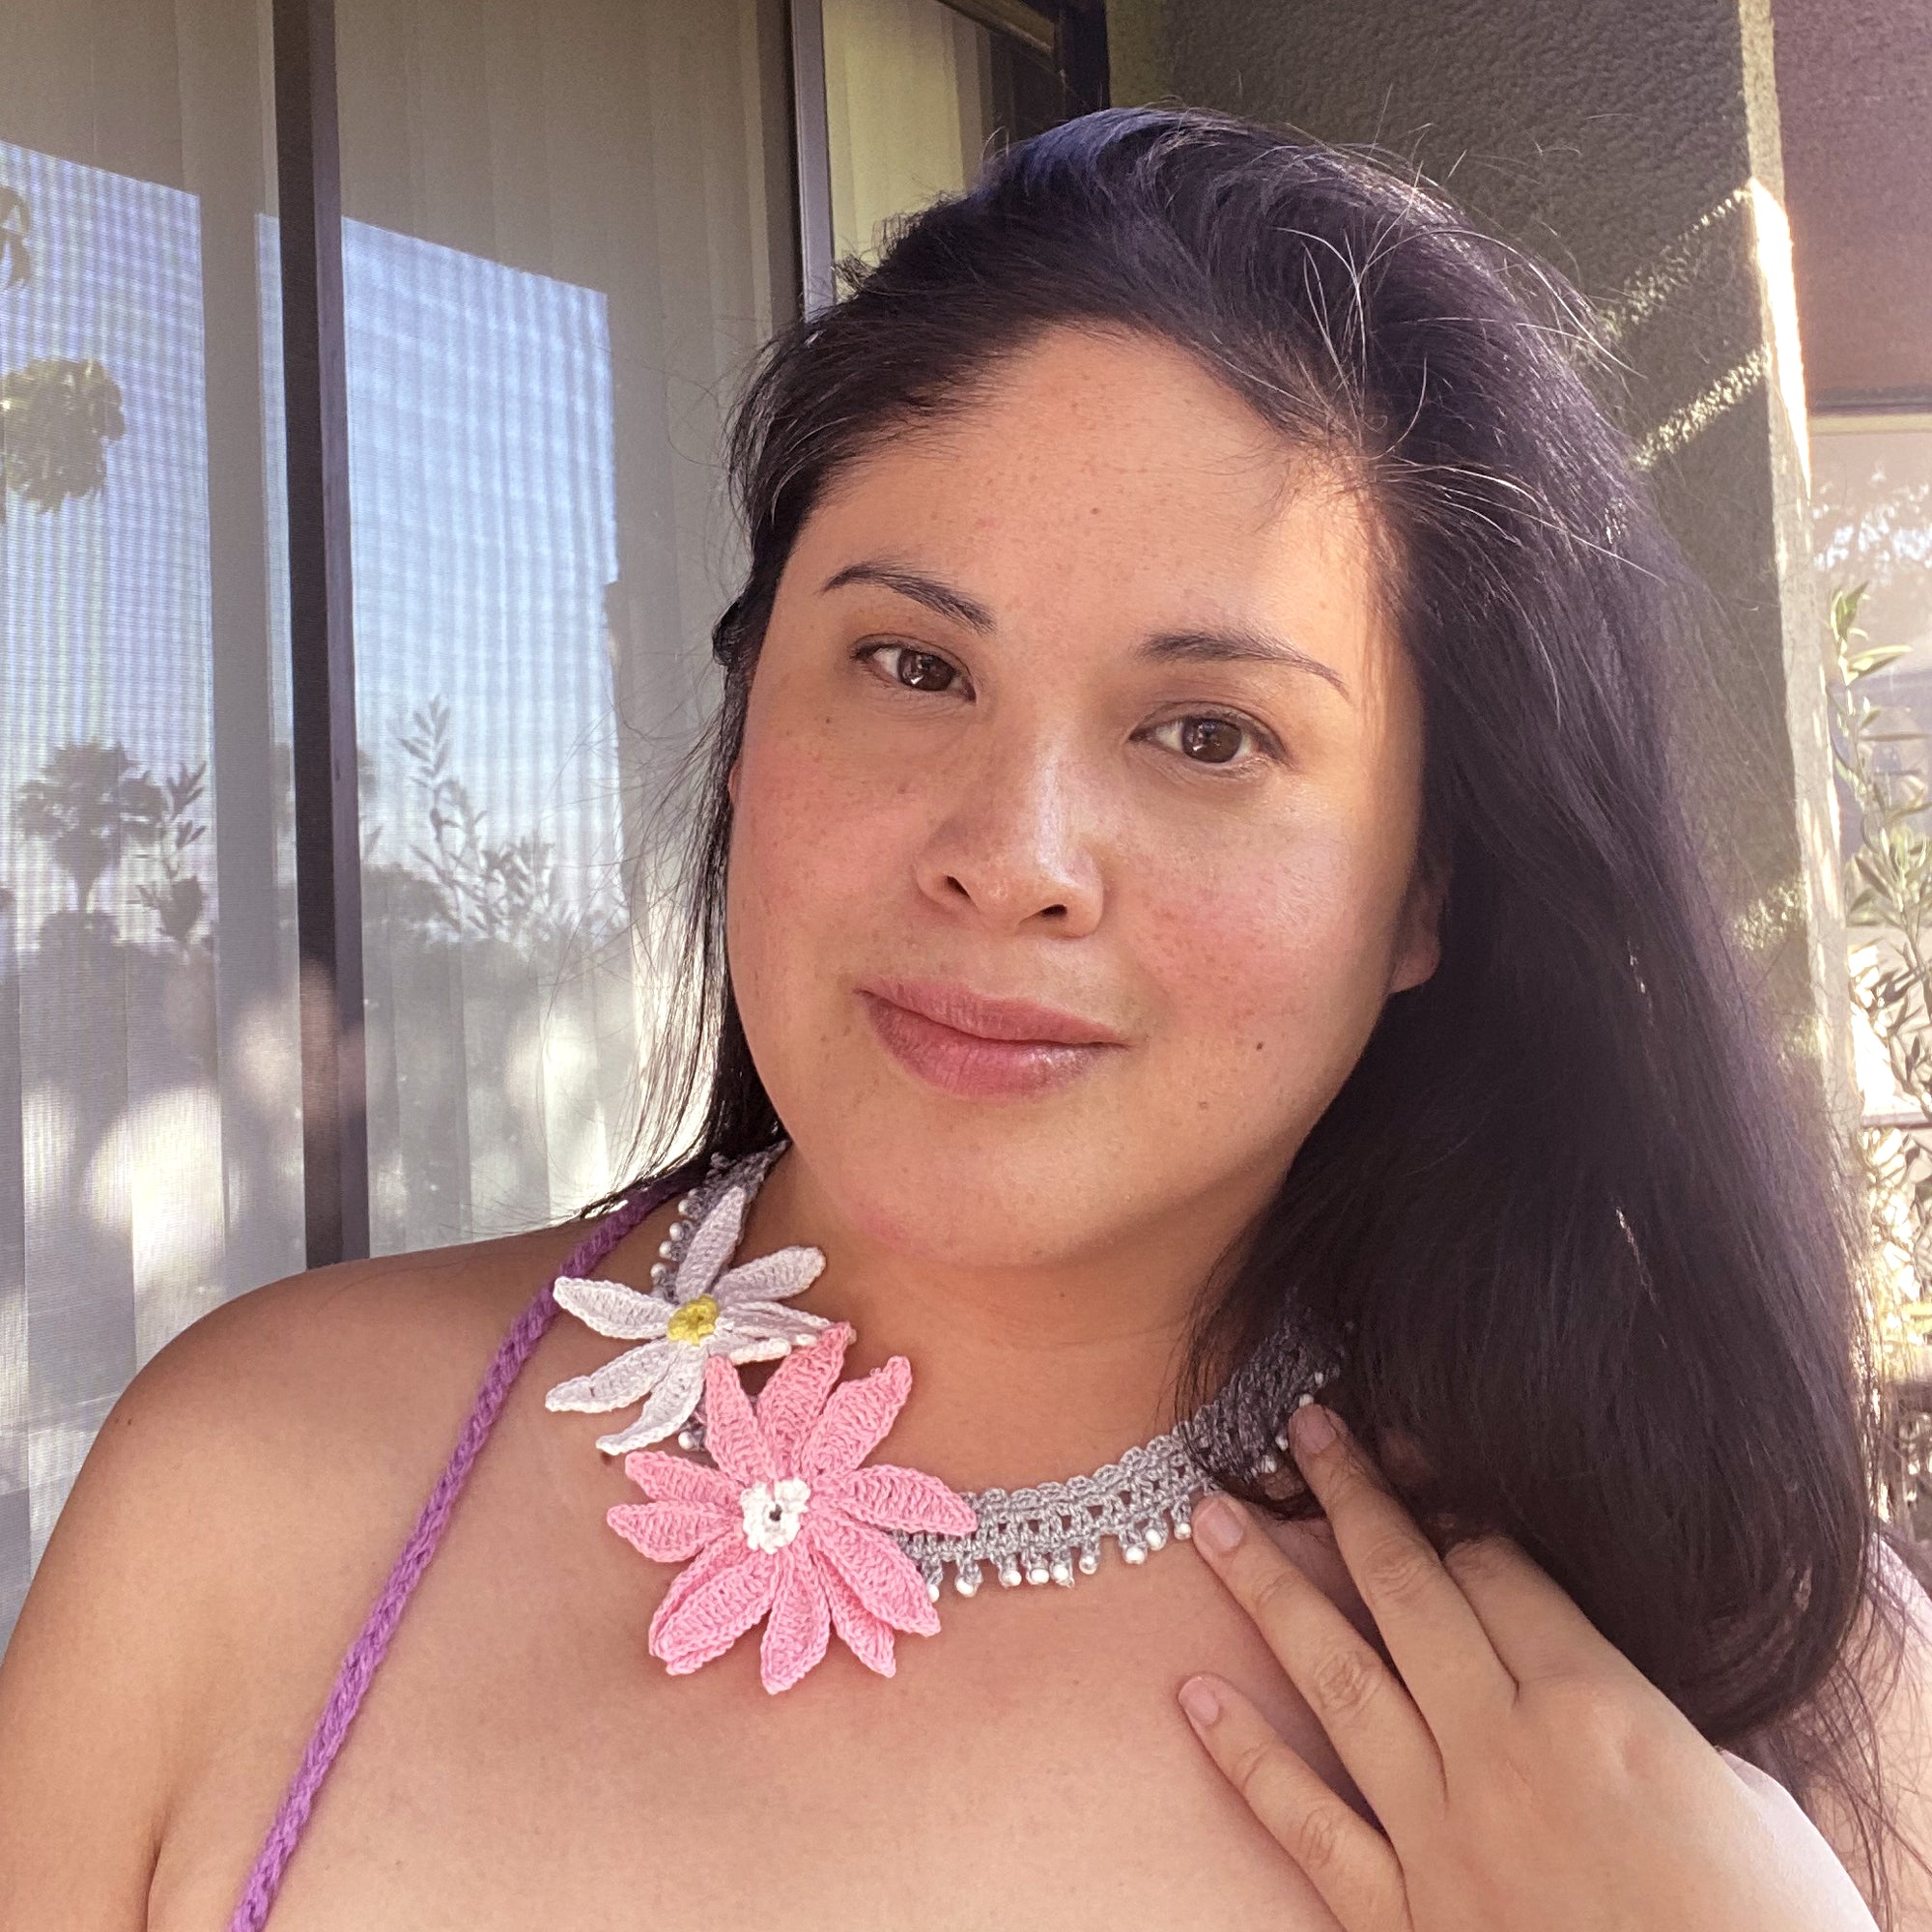 Jenny Dayco wearing a white and pink daisy crochet necklace